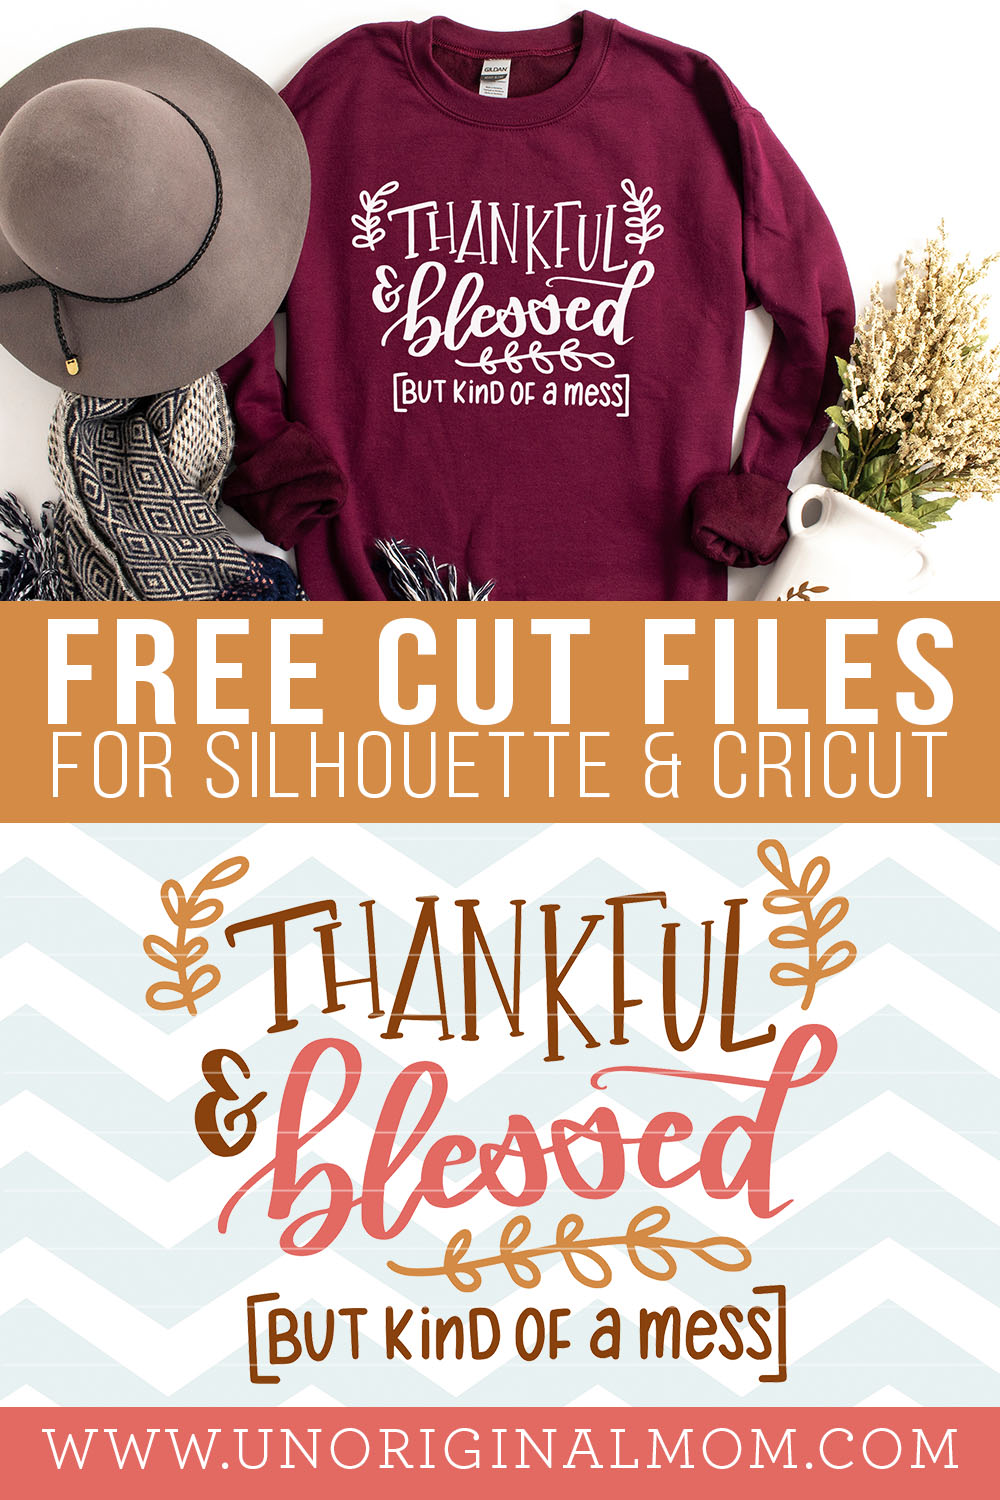 A collection of free thankful SVGs for Thanksgiving, including this "Thankful & Blessed but kind of a mess" SVG for Silhouette and Cricut